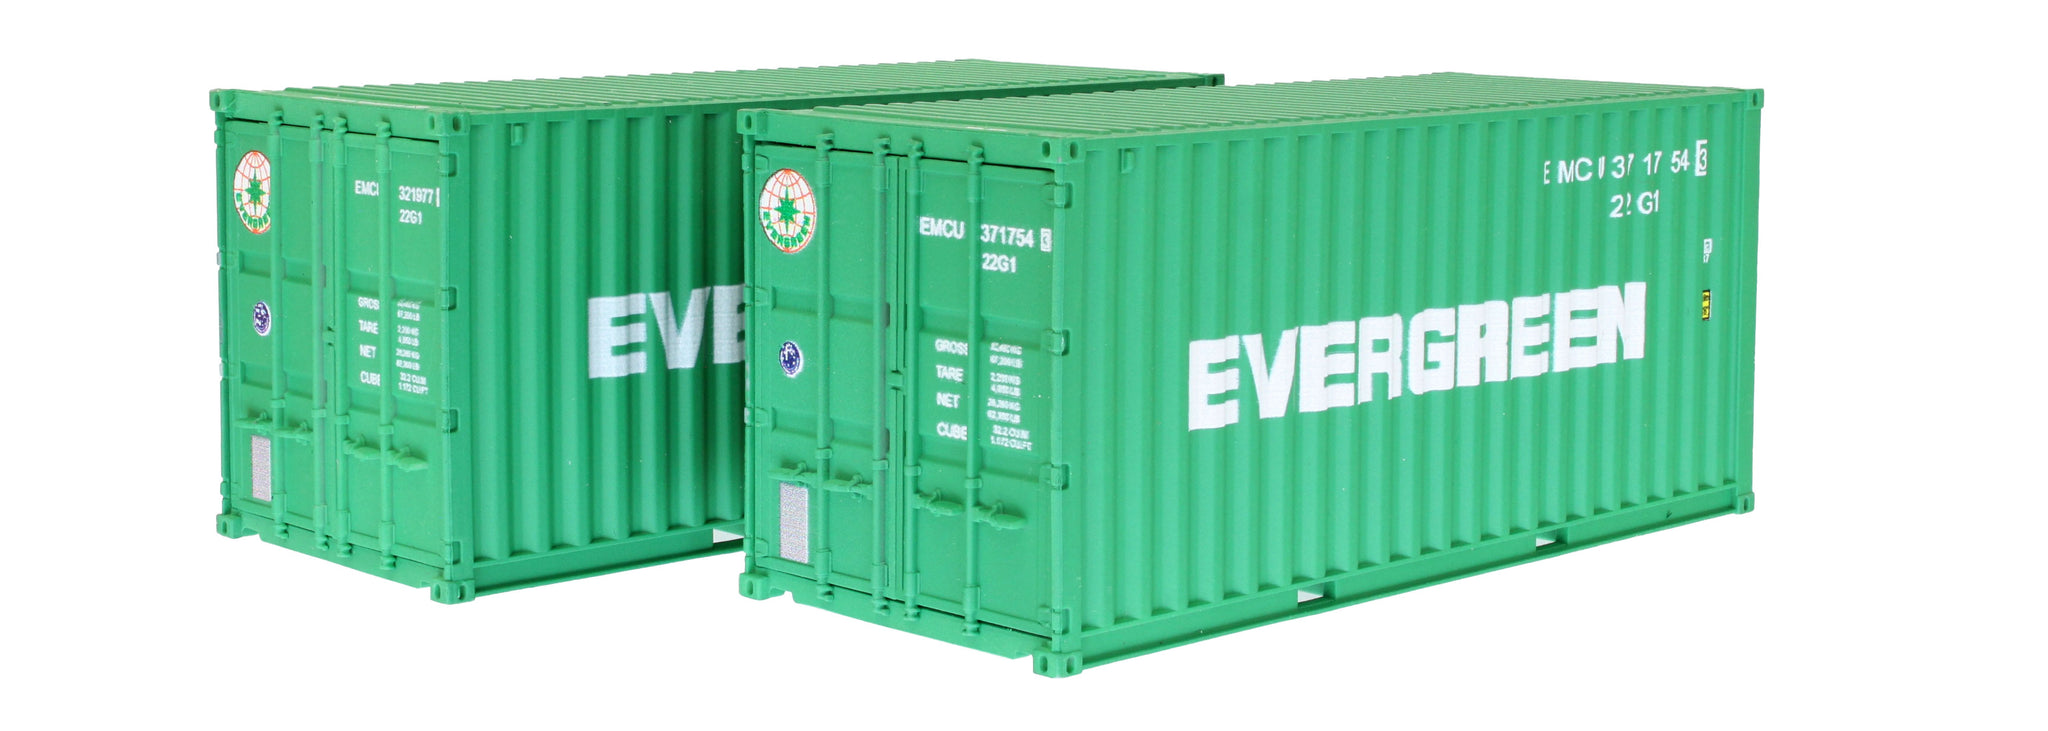 4F-028-055 OO Gauge Container 20FT Evergreen EMCU Twin Pack 7591 5 & 01151 3